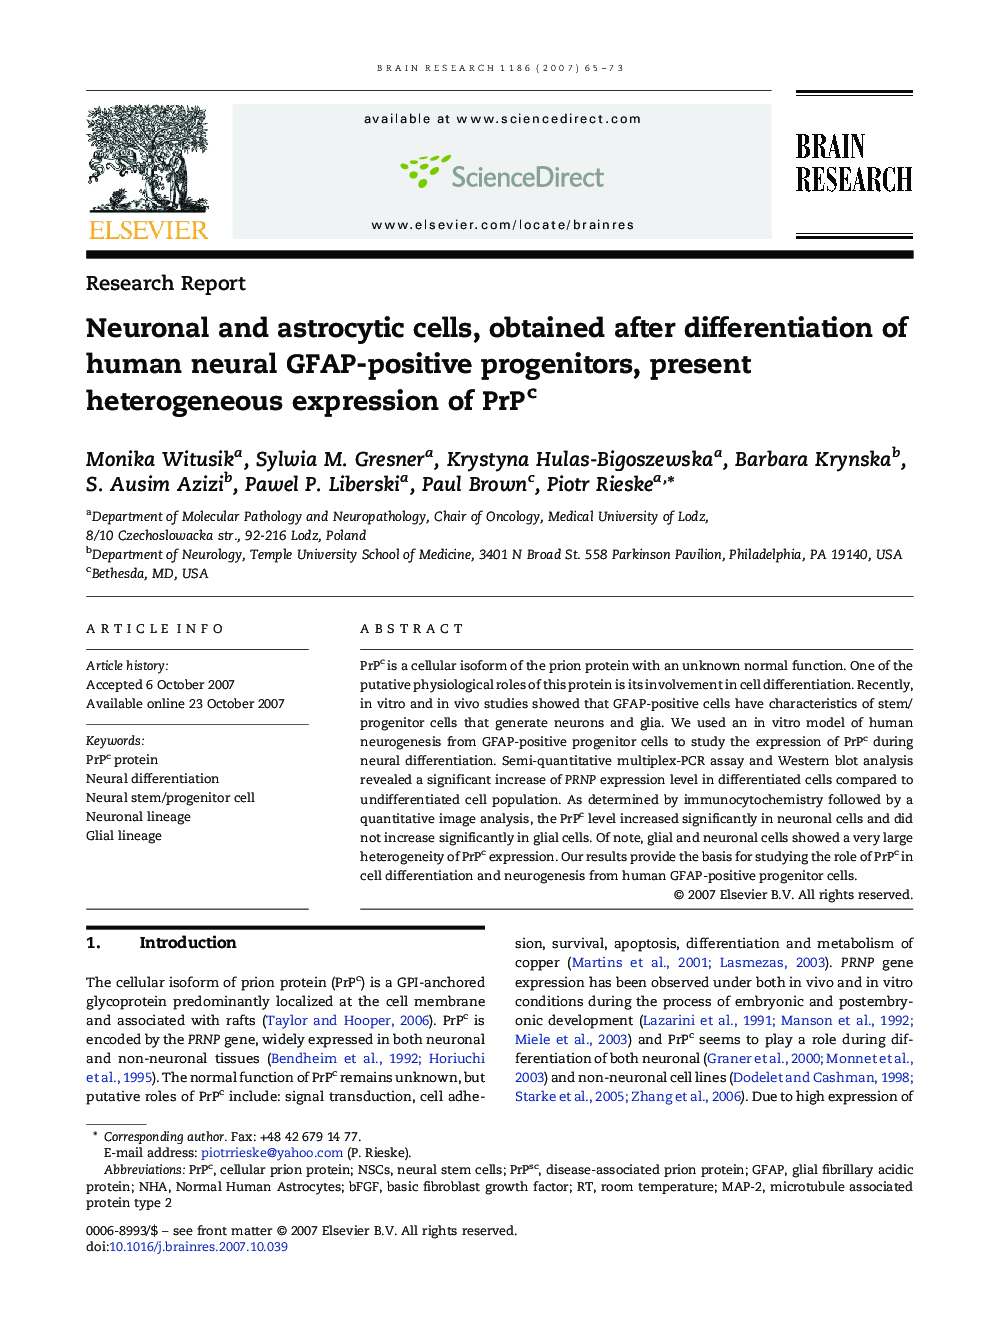 Neuronal and astrocytic cells, obtained after differentiation of human neural GFAP-positive progenitors, present heterogeneous expression of PrPc